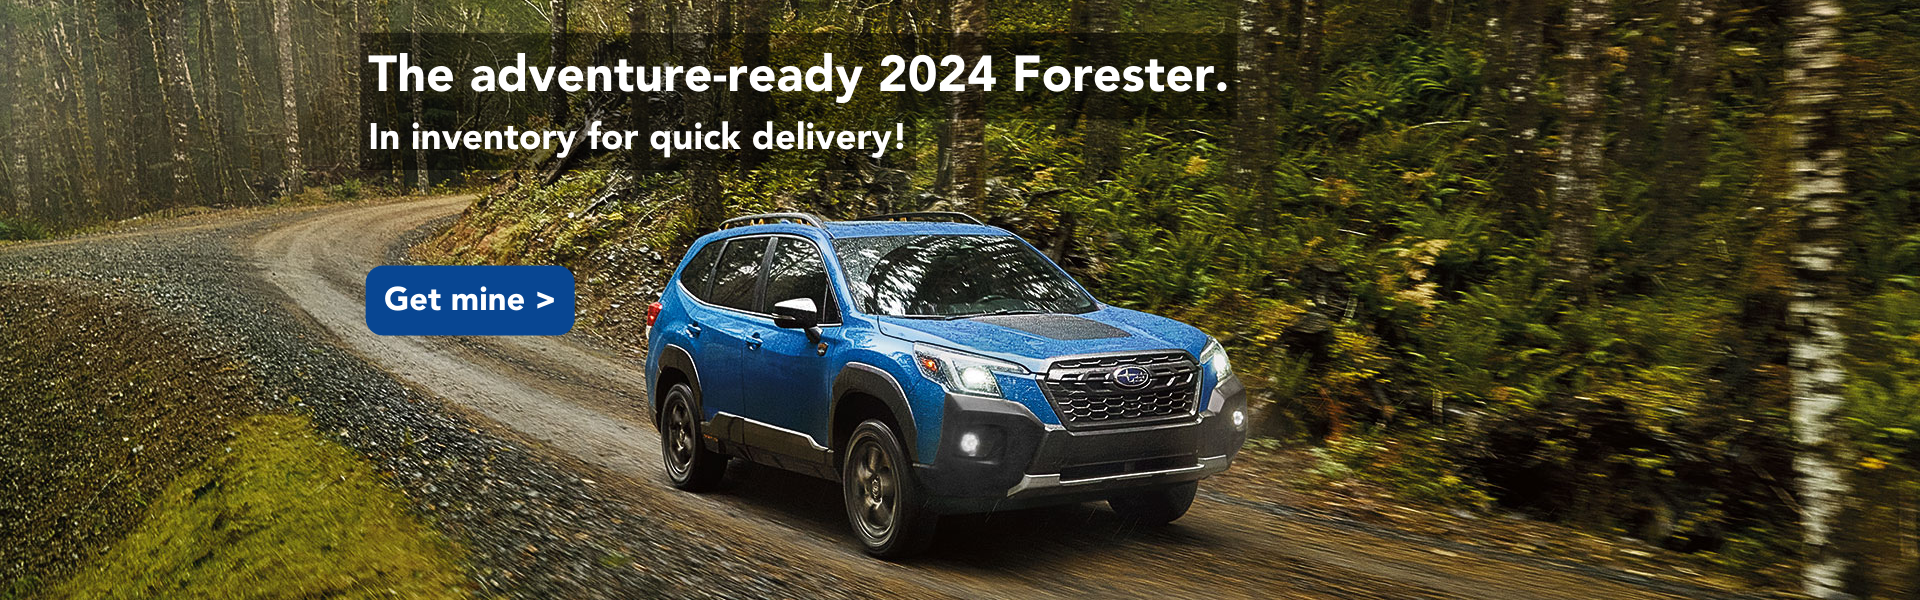 2024-forester